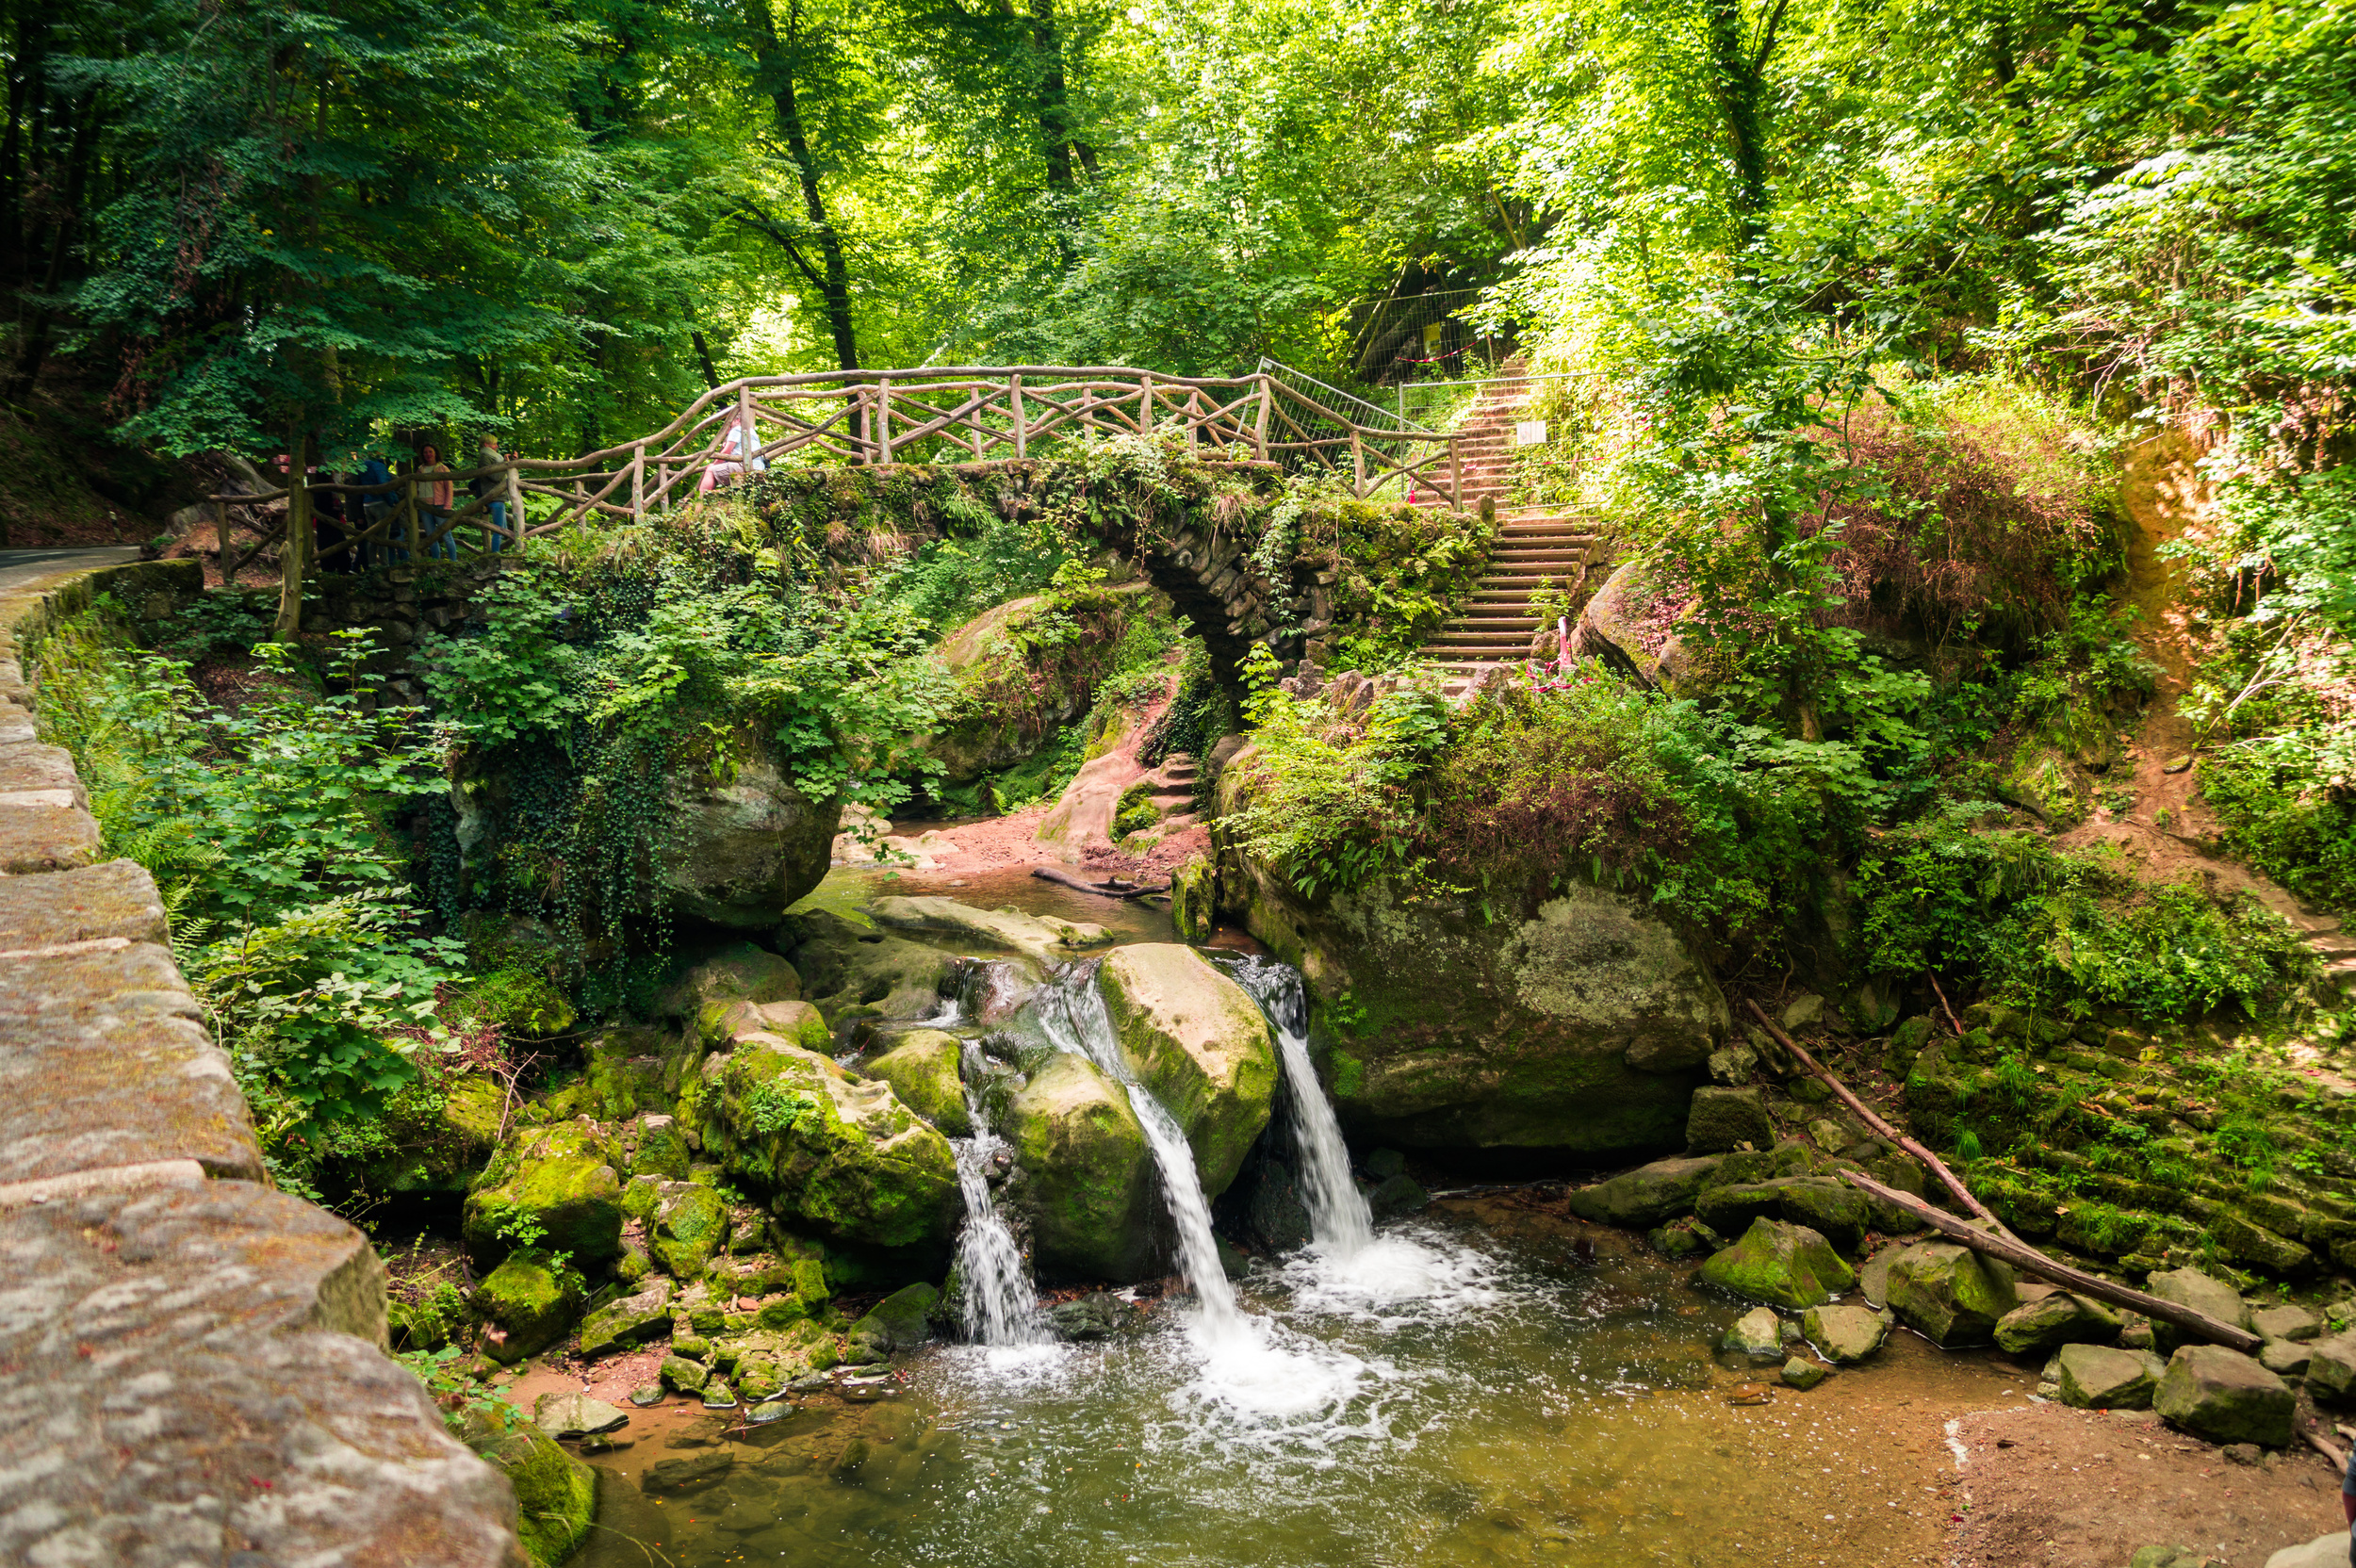 <p>While the actual resemblance to Switzerland is questionable, it is a nice place for a nature walk. Instagram-worthy waterfalls and forested tracks for all levels of hikers await you. In the picturesque north of the country, it’s lovely year-round.</p><p>You may also like: <a href='https://www.yardbarker.com/lifestyle/articles/20_travel_tips_for_planning_and_enjoying_the_perfect_getaway_012524/s1__37653228'>20 travel tips for planning (and enjoying!) the perfect getaway</a></p>